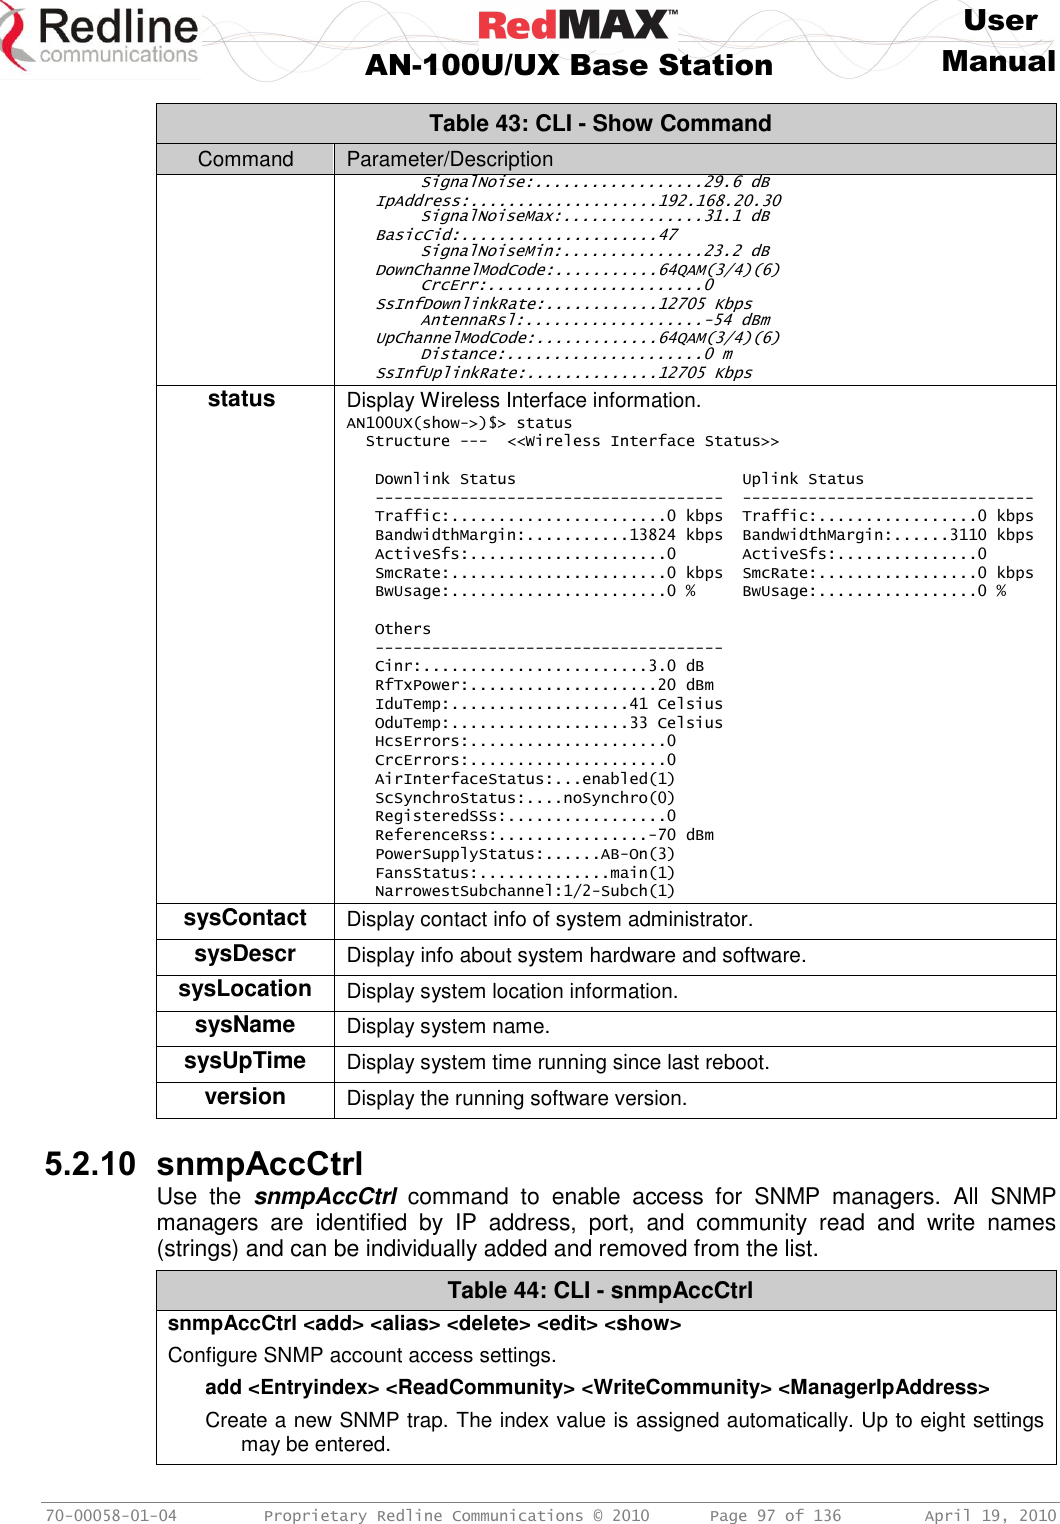     User  AN-100U/UX Base Station Manual   70-00058-01-04  Proprietary Redline Communications © 2010   Page 97 of 136  April 19, 2010 Table 43: CLI - Show Command Command Parameter/Description   SignalNoise:..................29.6 dB    IpAddress:....................192.168.20.30   SignalNoiseMax:...............31.1 dB    BasicCid:.....................47     SignalNoiseMin:...............23.2 dB    DownChannelModCode:...........64QAM(3/4)(6)  CrcErr:.......................0    SsInfDownlinkRate:............12705 Kbps  AntennaRsl:...................-54 dBm    UpChannelModCode:.............64QAM(3/4)(6)  Distance:.....................0 m    SsInfUplinkRate:..............12705 Kbps status  Display Wireless Interface information. AN100UX(show-&gt;)$&gt; status   Structure ---  &lt;&lt;Wireless Interface Status&gt;&gt;     Downlink Status                        Uplink Status    -------------------------------------  -------------------------------    Traffic:.......................0 kbps  Traffic:.................0 kbps    BandwidthMargin:...........13824 kbps  BandwidthMargin:......3110 kbps    ActiveSfs:.....................0       ActiveSfs:...............0    SmcRate:.......................0 kbps  SmcRate:.................0 kbps    BwUsage:.......................0 %     BwUsage:.................0 %     Others    -------------------------------------    Cinr:........................3.0 dB    RfTxPower:....................20 dBm    IduTemp:...................41 Celsius    OduTemp:...................33 Celsius    HcsErrors:.....................0    CrcErrors:.....................0    AirInterfaceStatus:...enabled(1)    ScSynchroStatus:....noSynchro(0)    RegisteredSSs:.................0    ReferenceRss:................-70 dBm    PowerSupplyStatus:......AB-On(3)    FansStatus:..............main(1)    NarrowestSubchannel:1/2-Subch(1) sysContact Display contact info of system administrator. sysDescr Display info about system hardware and software. sysLocation Display system location information. sysName Display system name. sysUpTime Display system time running since last reboot. version Display the running software version.   5.2.10 snmpAccCtrl Use  the  snmpAccCtrl  command  to  enable  access  for  SNMP  managers.  All  SNMP managers  are  identified  by  IP  address,  port,  and  community  read  and  write  names (strings) and can be individually added and removed from the list.  Table 44: CLI - snmpAccCtrl snmpAccCtrl &lt;add&gt; &lt;alias&gt; &lt;delete&gt; &lt;edit&gt; &lt;show&gt; Configure SNMP account access settings. add &lt;Entryindex&gt; &lt;ReadCommunity&gt; &lt;WriteCommunity&gt; &lt;ManagerIpAddress&gt; Create a new SNMP trap. The index value is assigned automatically. Up to eight settings may be entered. 